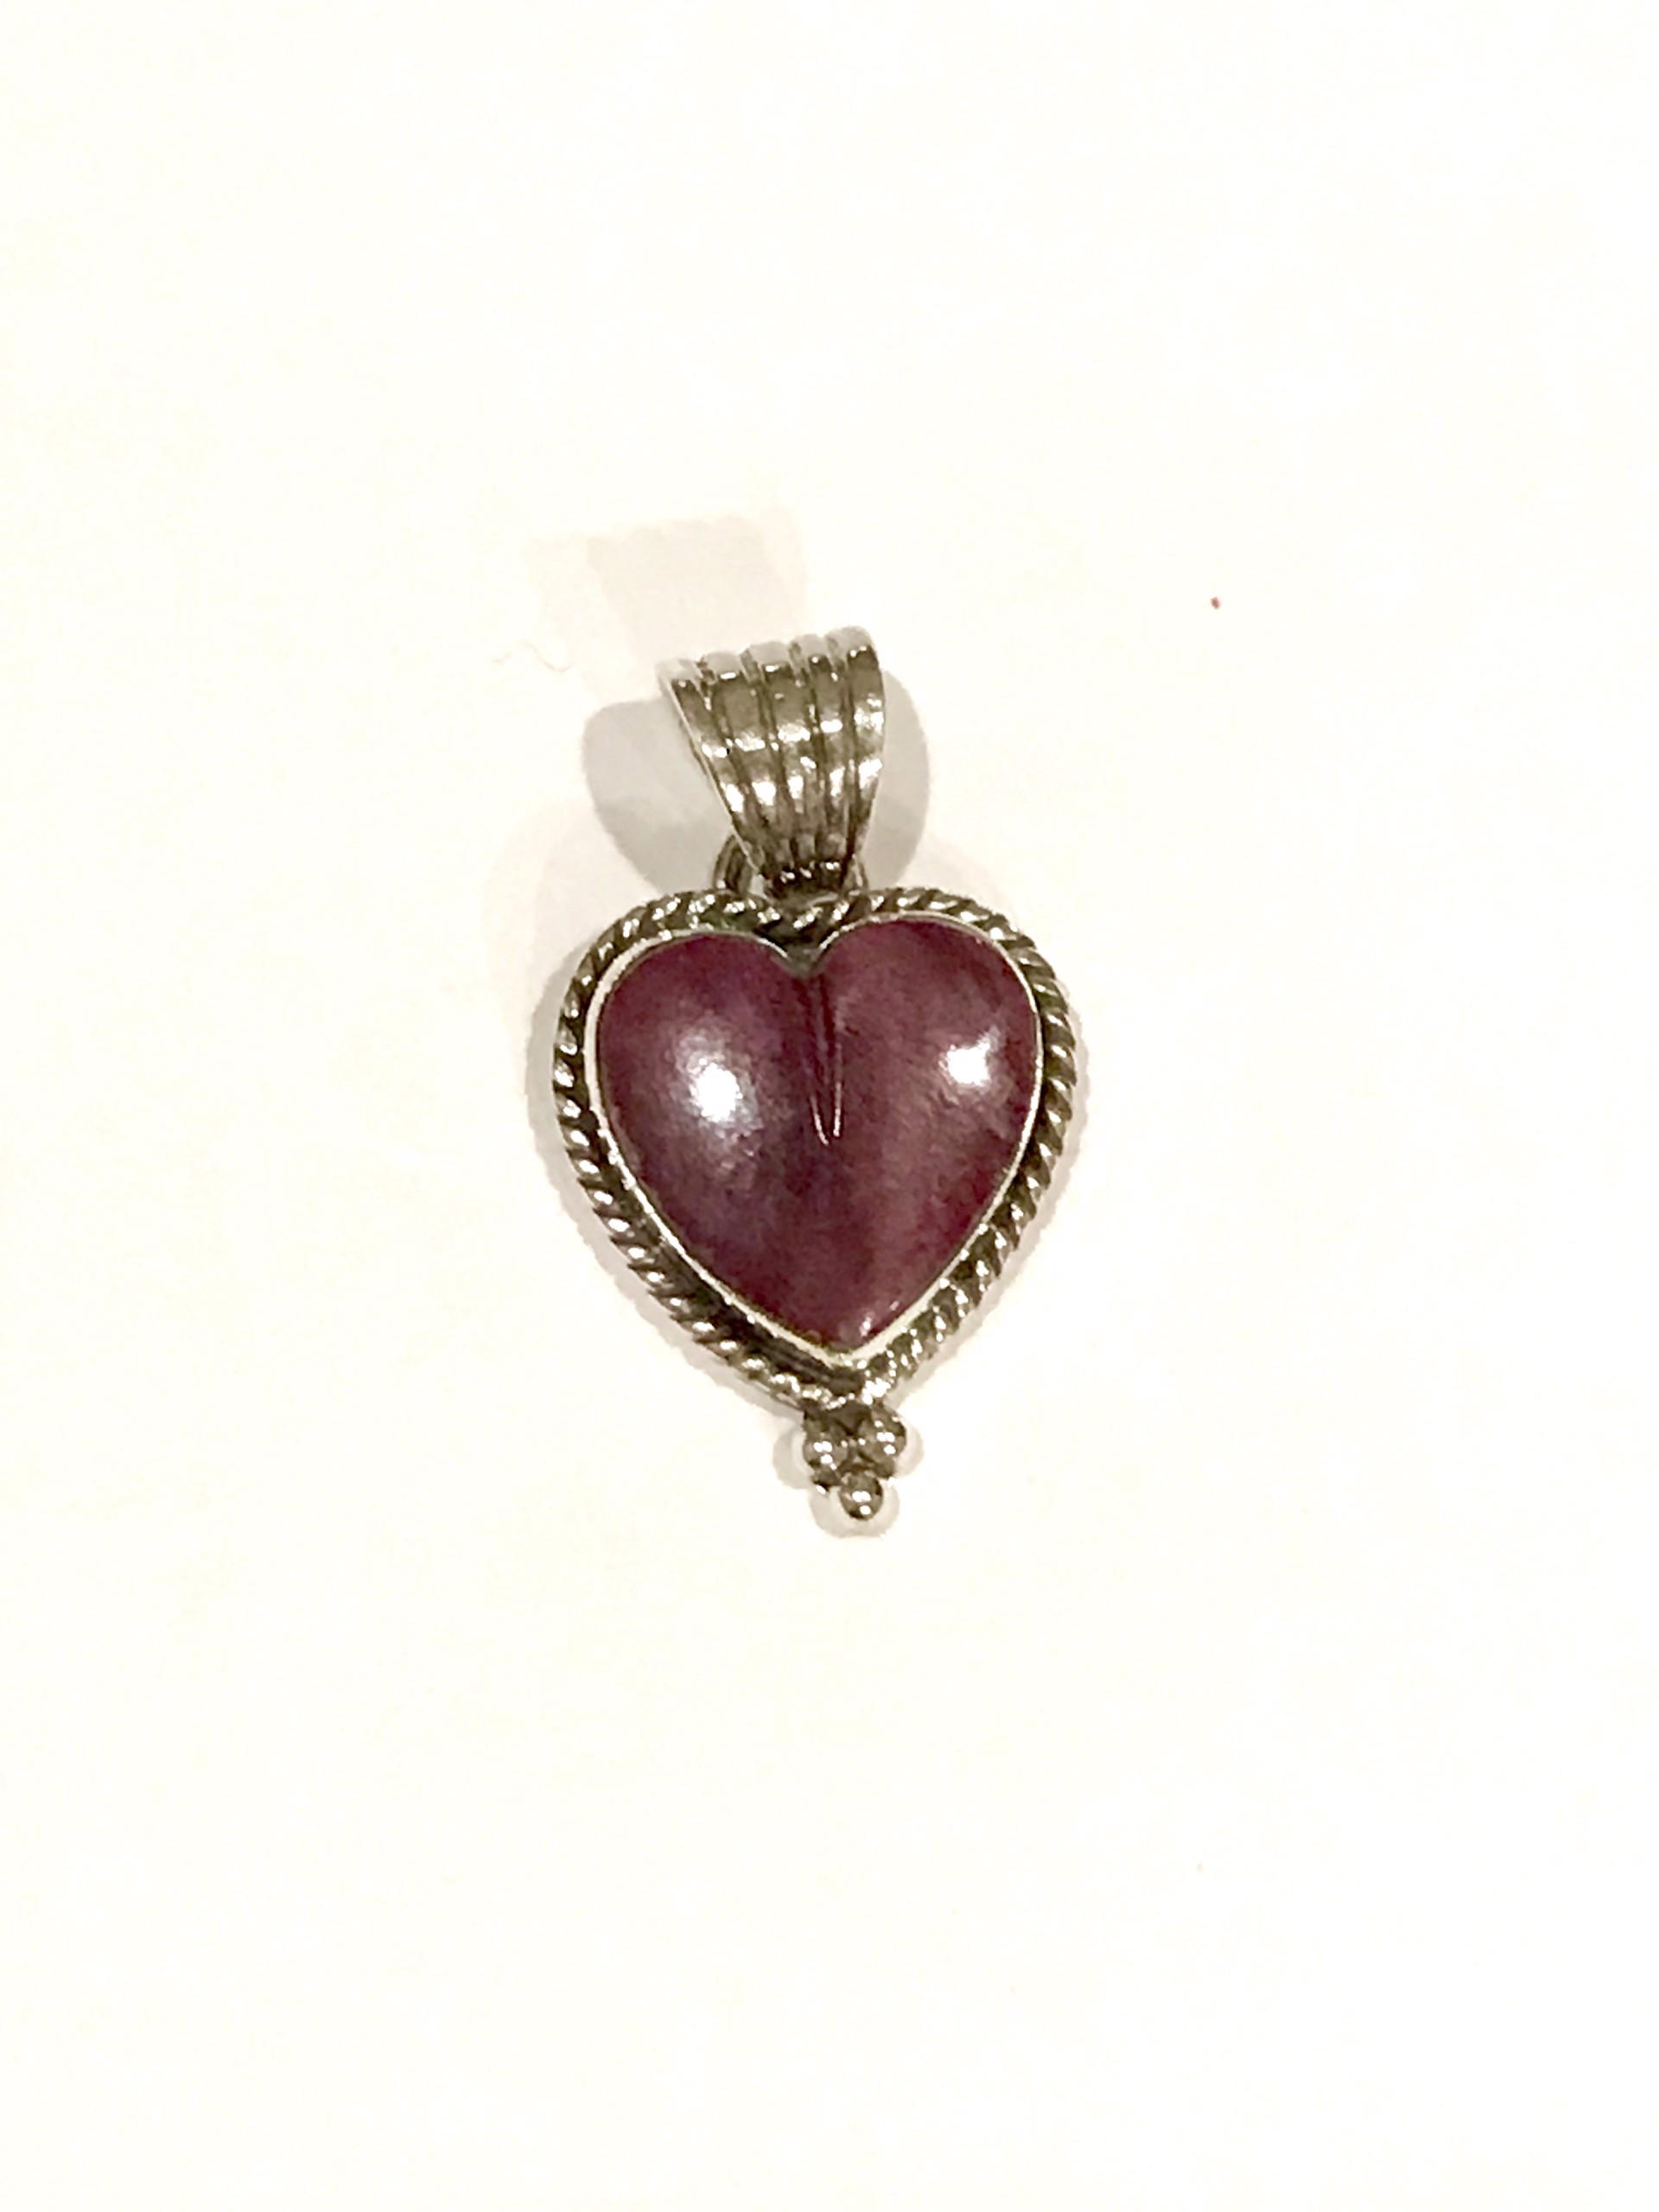 Pendant - Purple Spiny Oyster Heart with Silver Beading by Dan Dodson